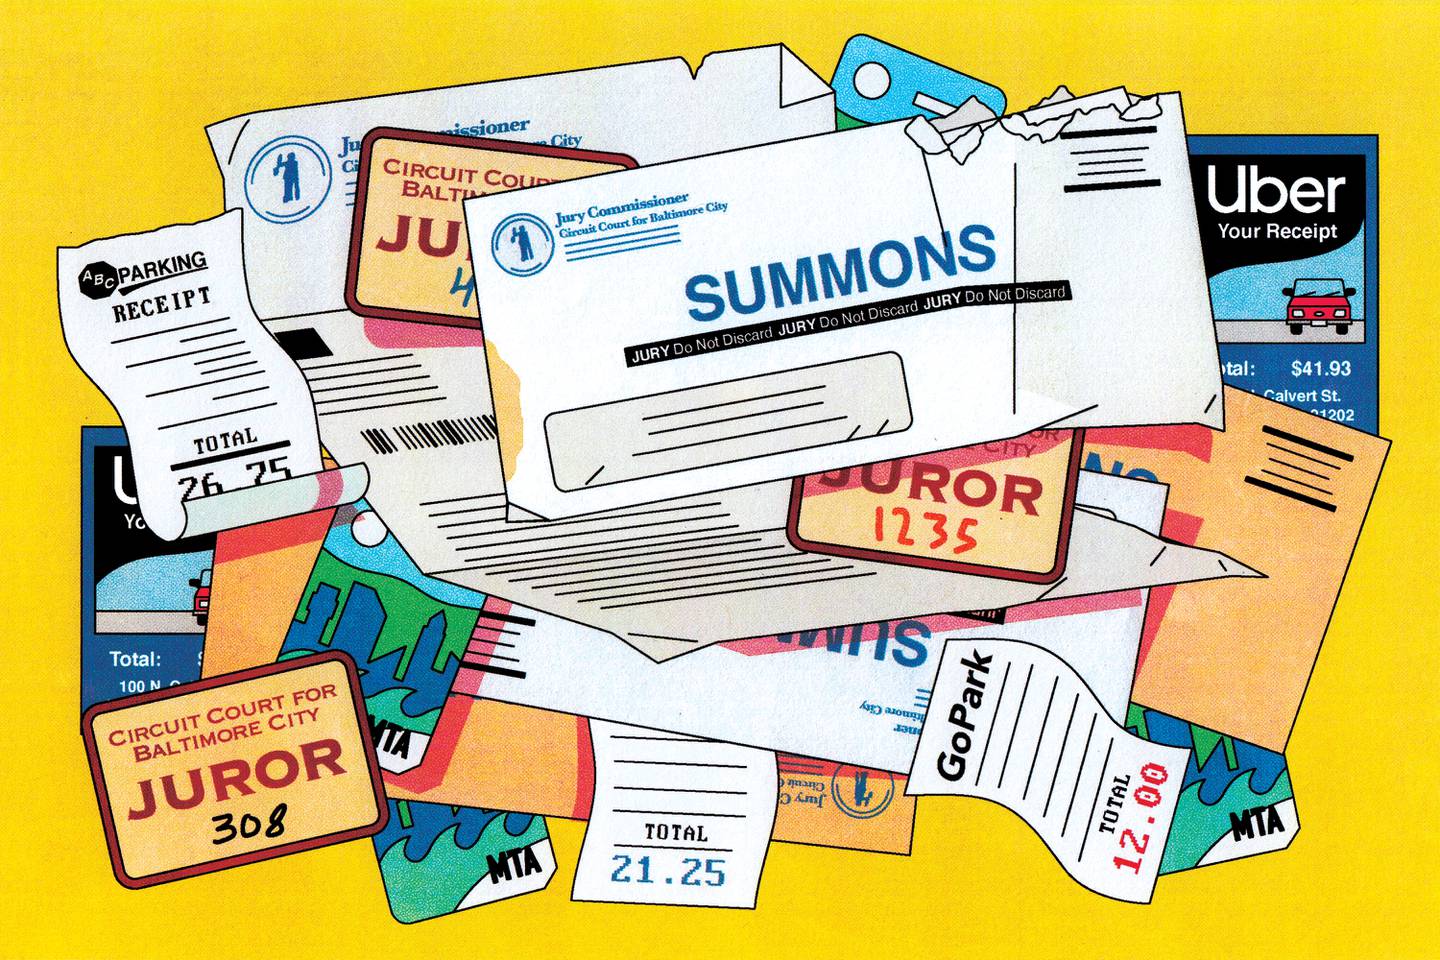 Illustration of messy pile or jury duty summons envelopes, juror stickers, MTA transit passes, Uber receipts and parking receipts.